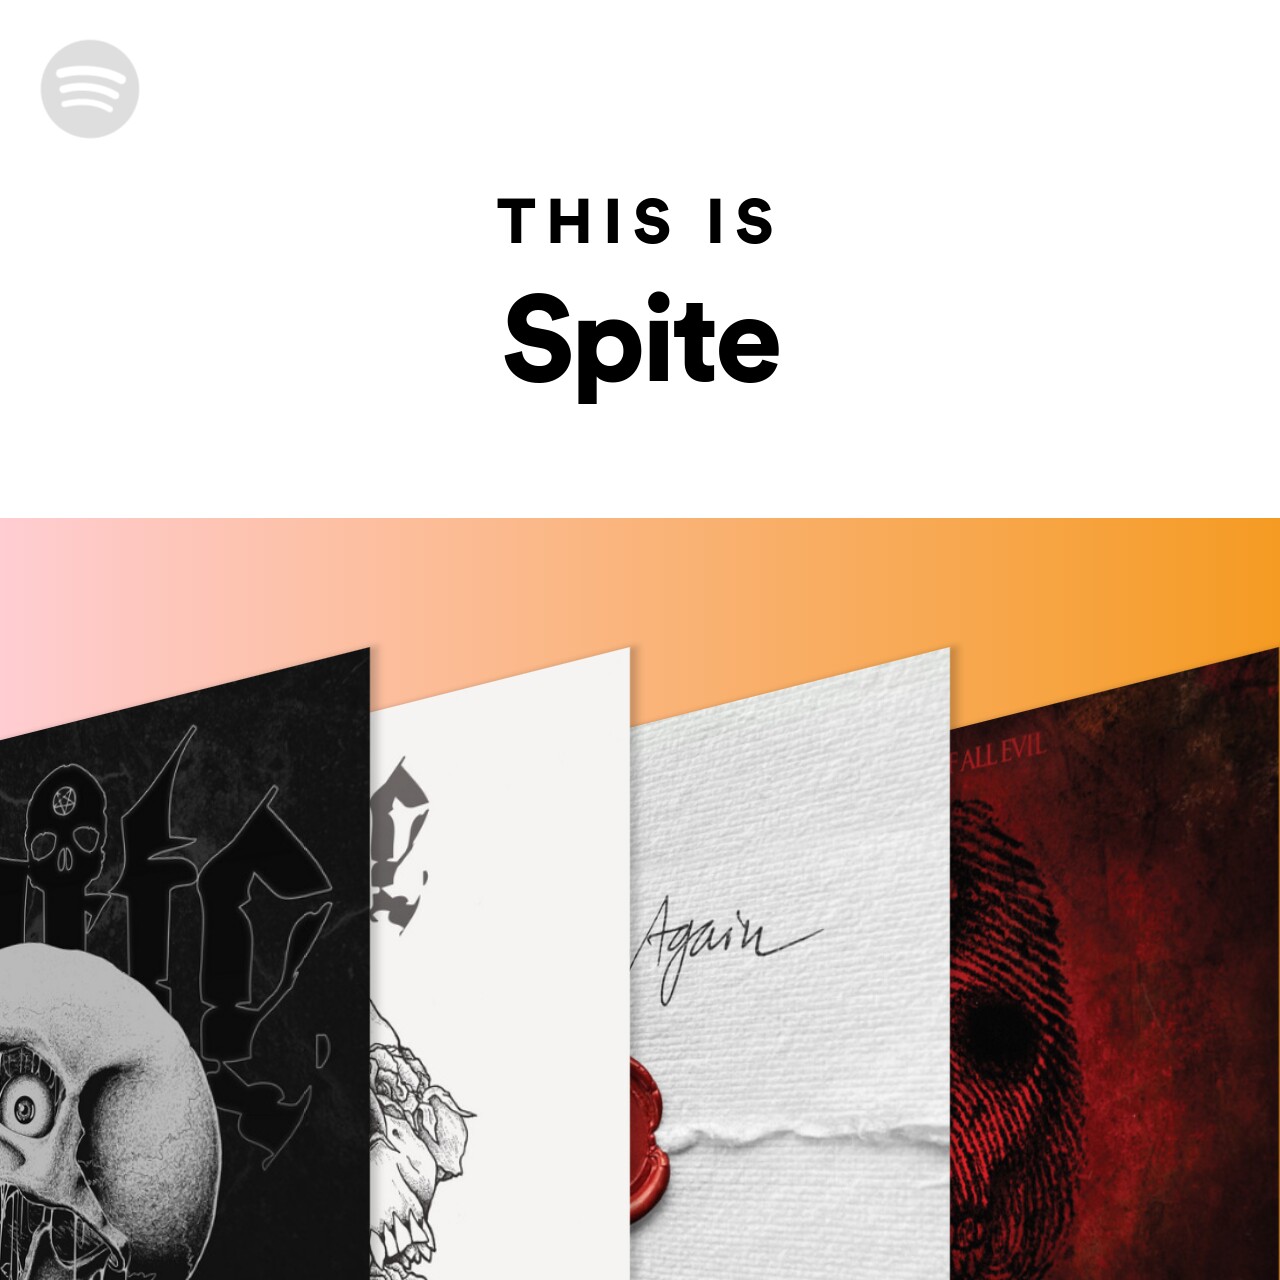 This Is Spite